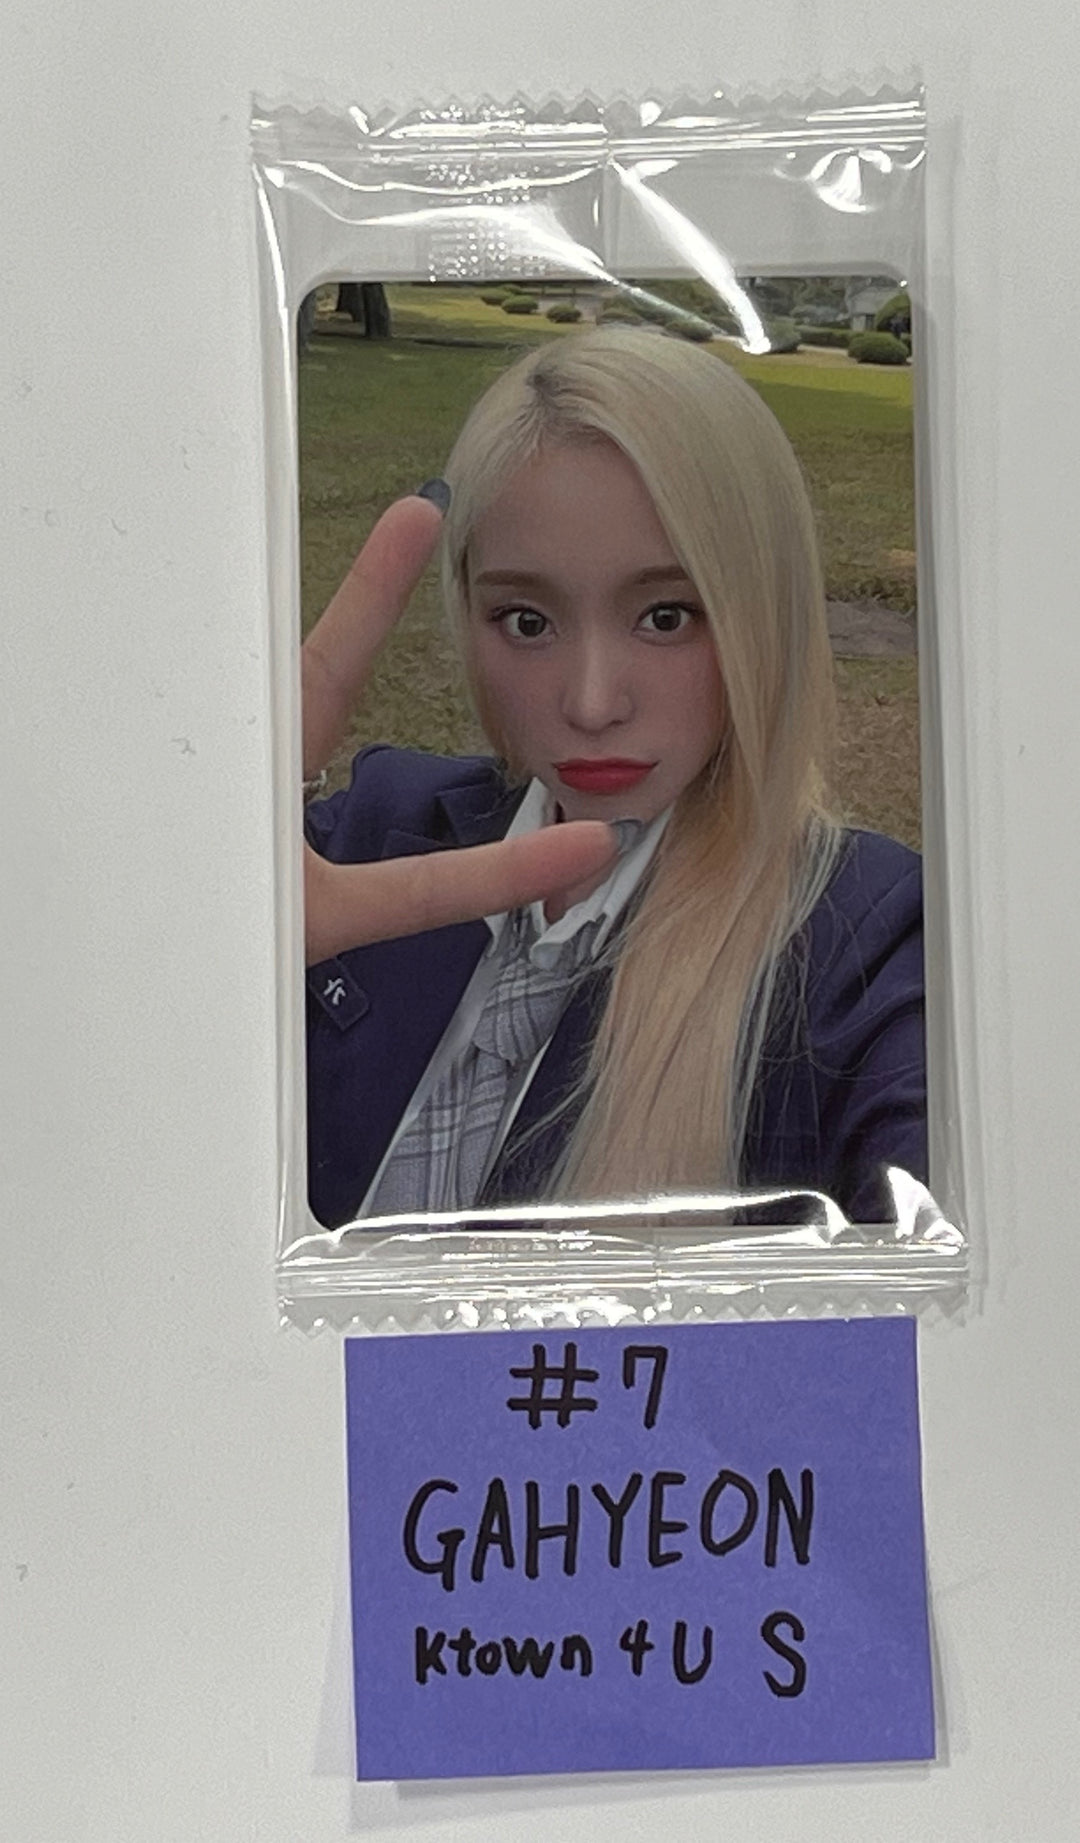 Dreamcatcher 2024 Season's Greetings "DREAM OF VICTORY ver." - Ktown4U Fansign Event Photocard [Restocked 2/7][23.12.21]